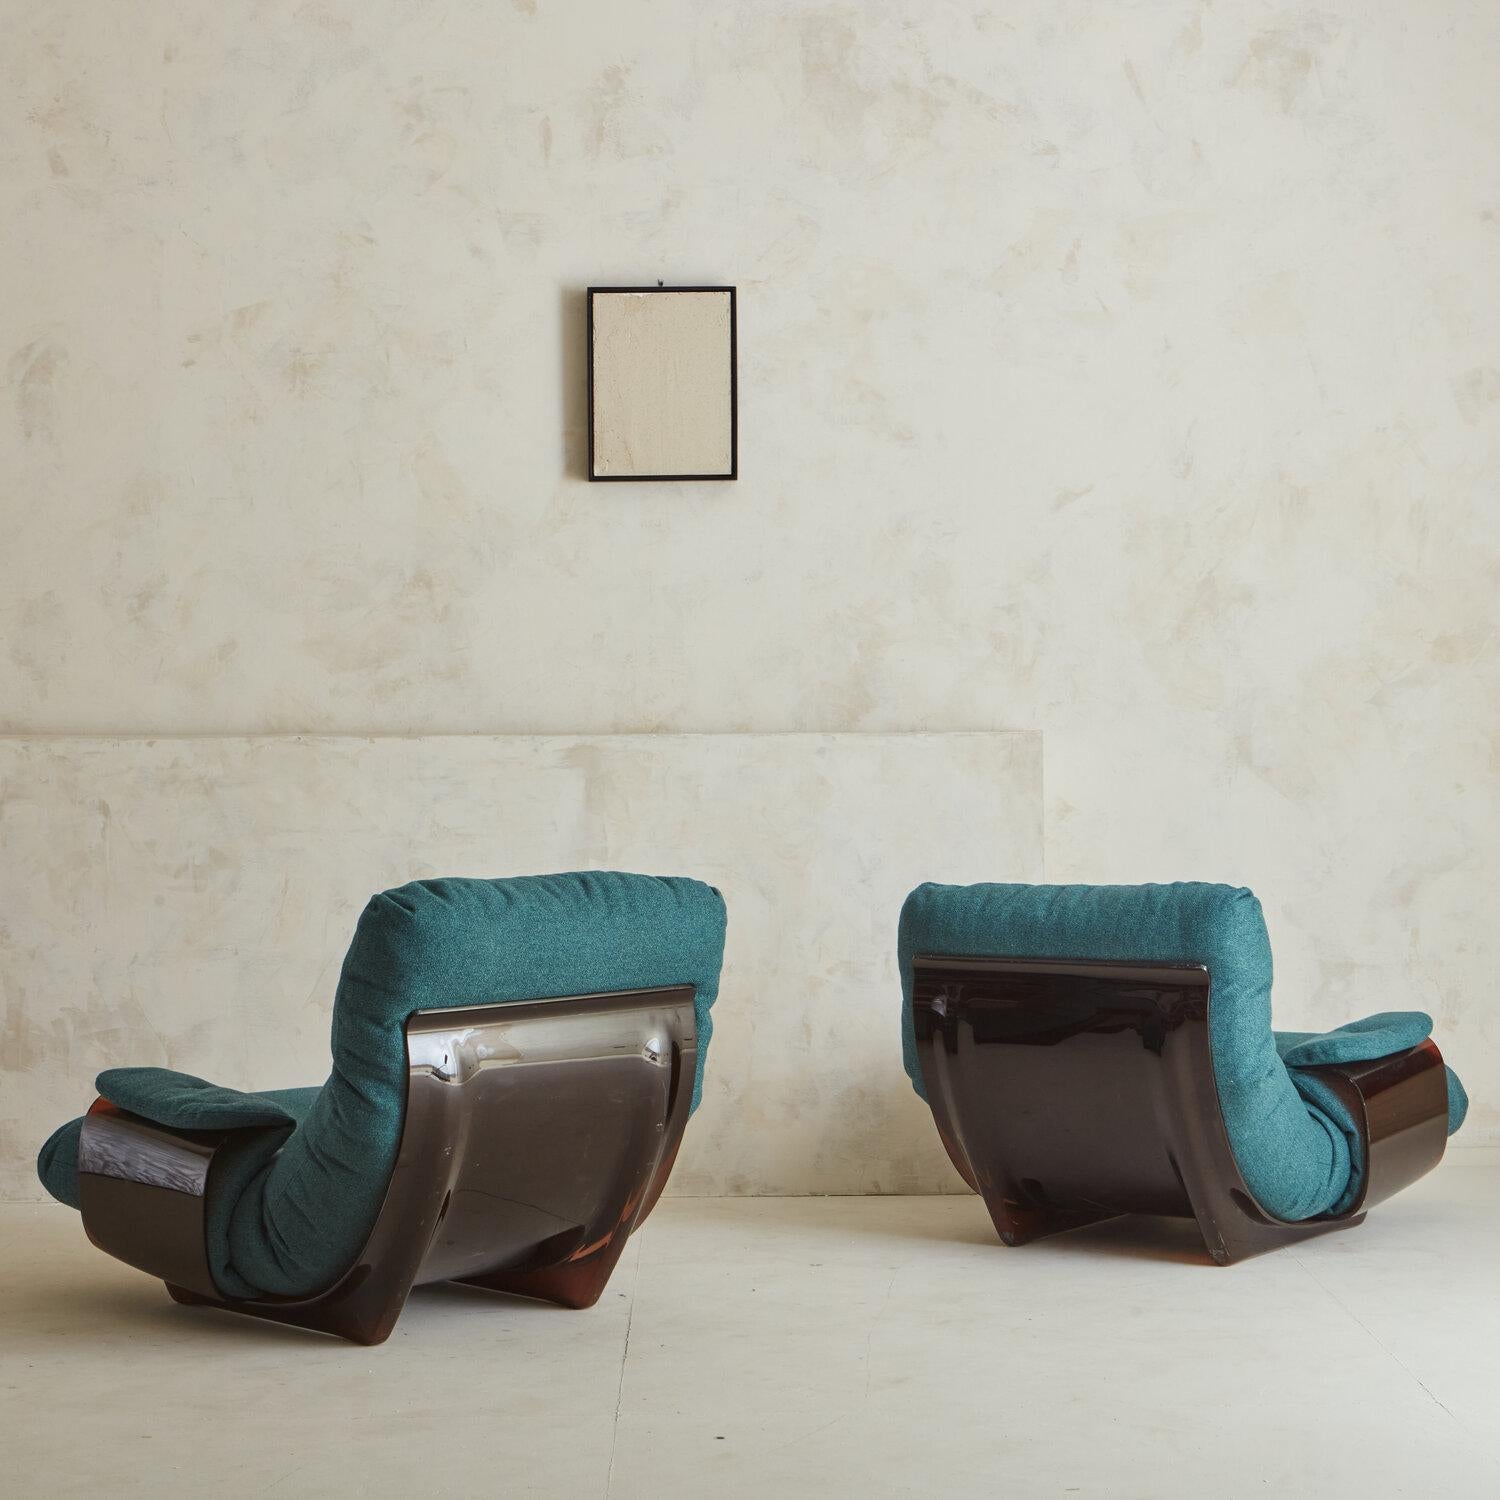 Late 20th Century Pair of Marsala Chairs in Original Fabric by Michel Ducaroy for Lignet Roset